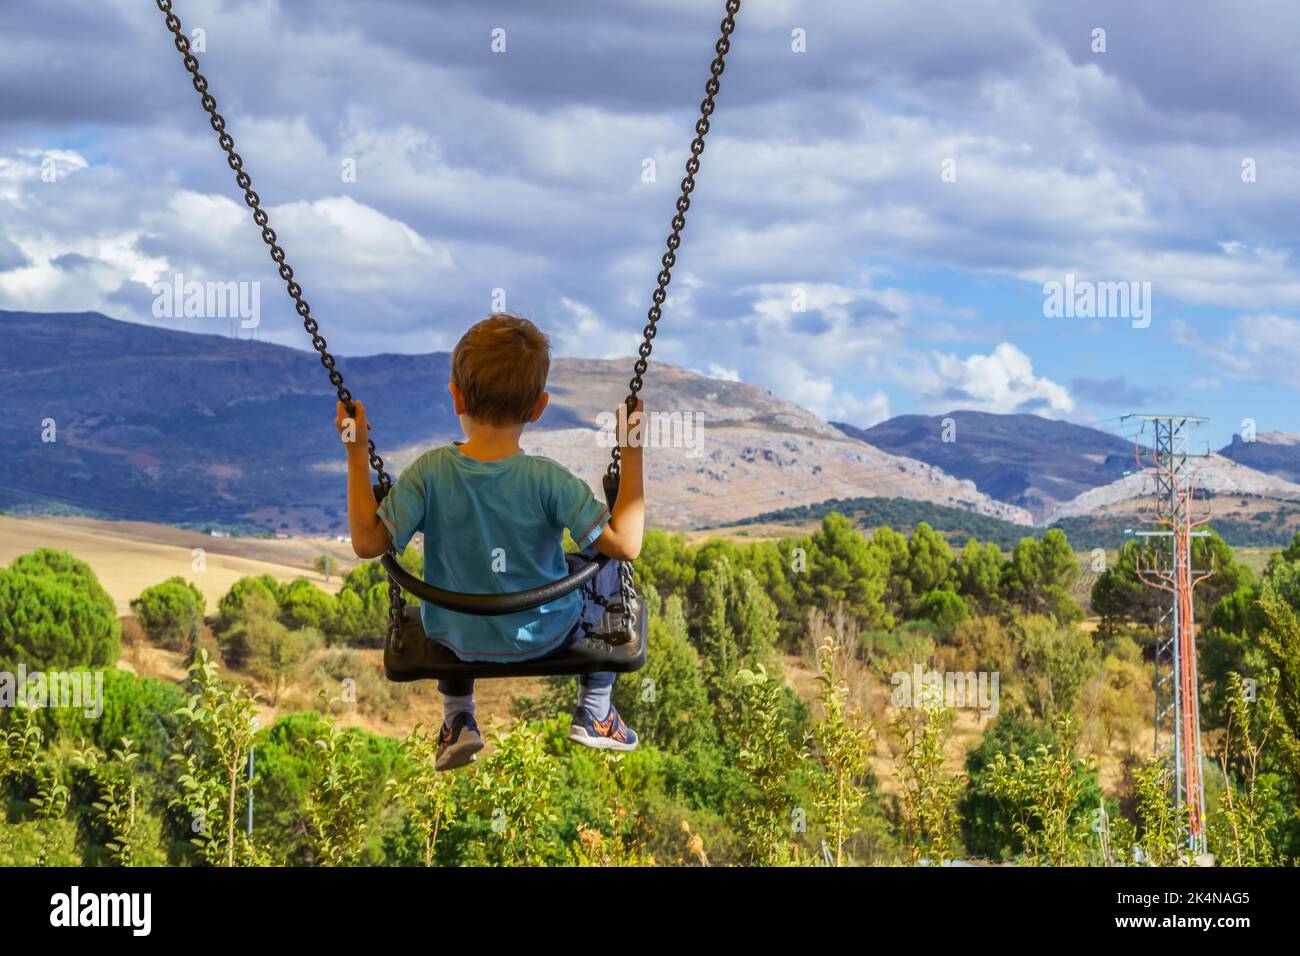 child with unrecognizable back swinging with a cloudy landscape in the background Stock Photo